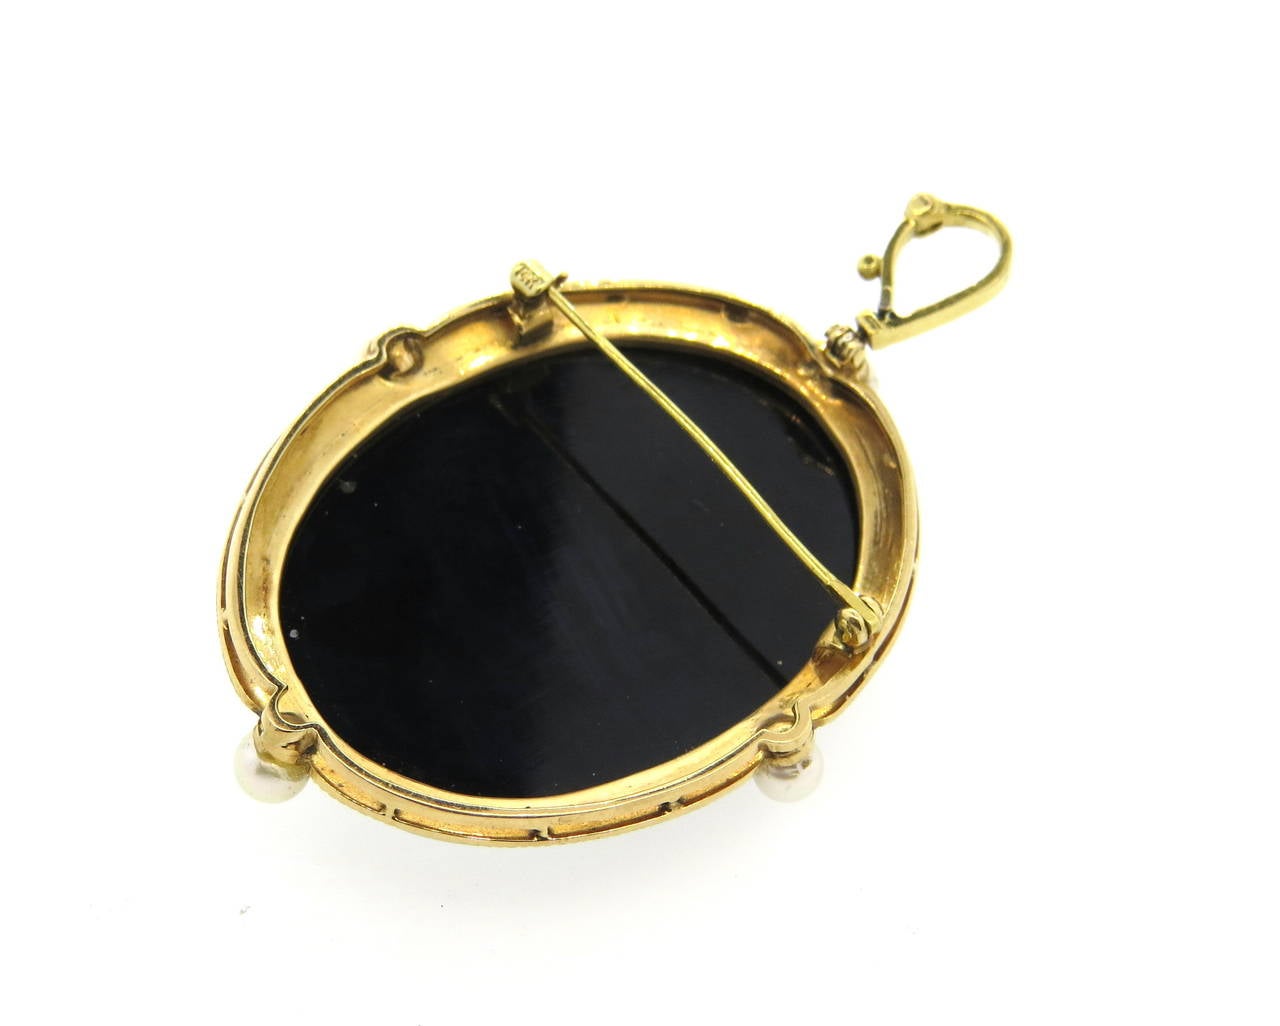 Antique circa 1870s 14k gold brooch, set with hardstone cameo, surrounded with four 4.6mm pearls.  Brooch has a bale, that was added at a later date so piece can also be worn as a pendant; pin stem has also been added later. Brooch measures 54mm x